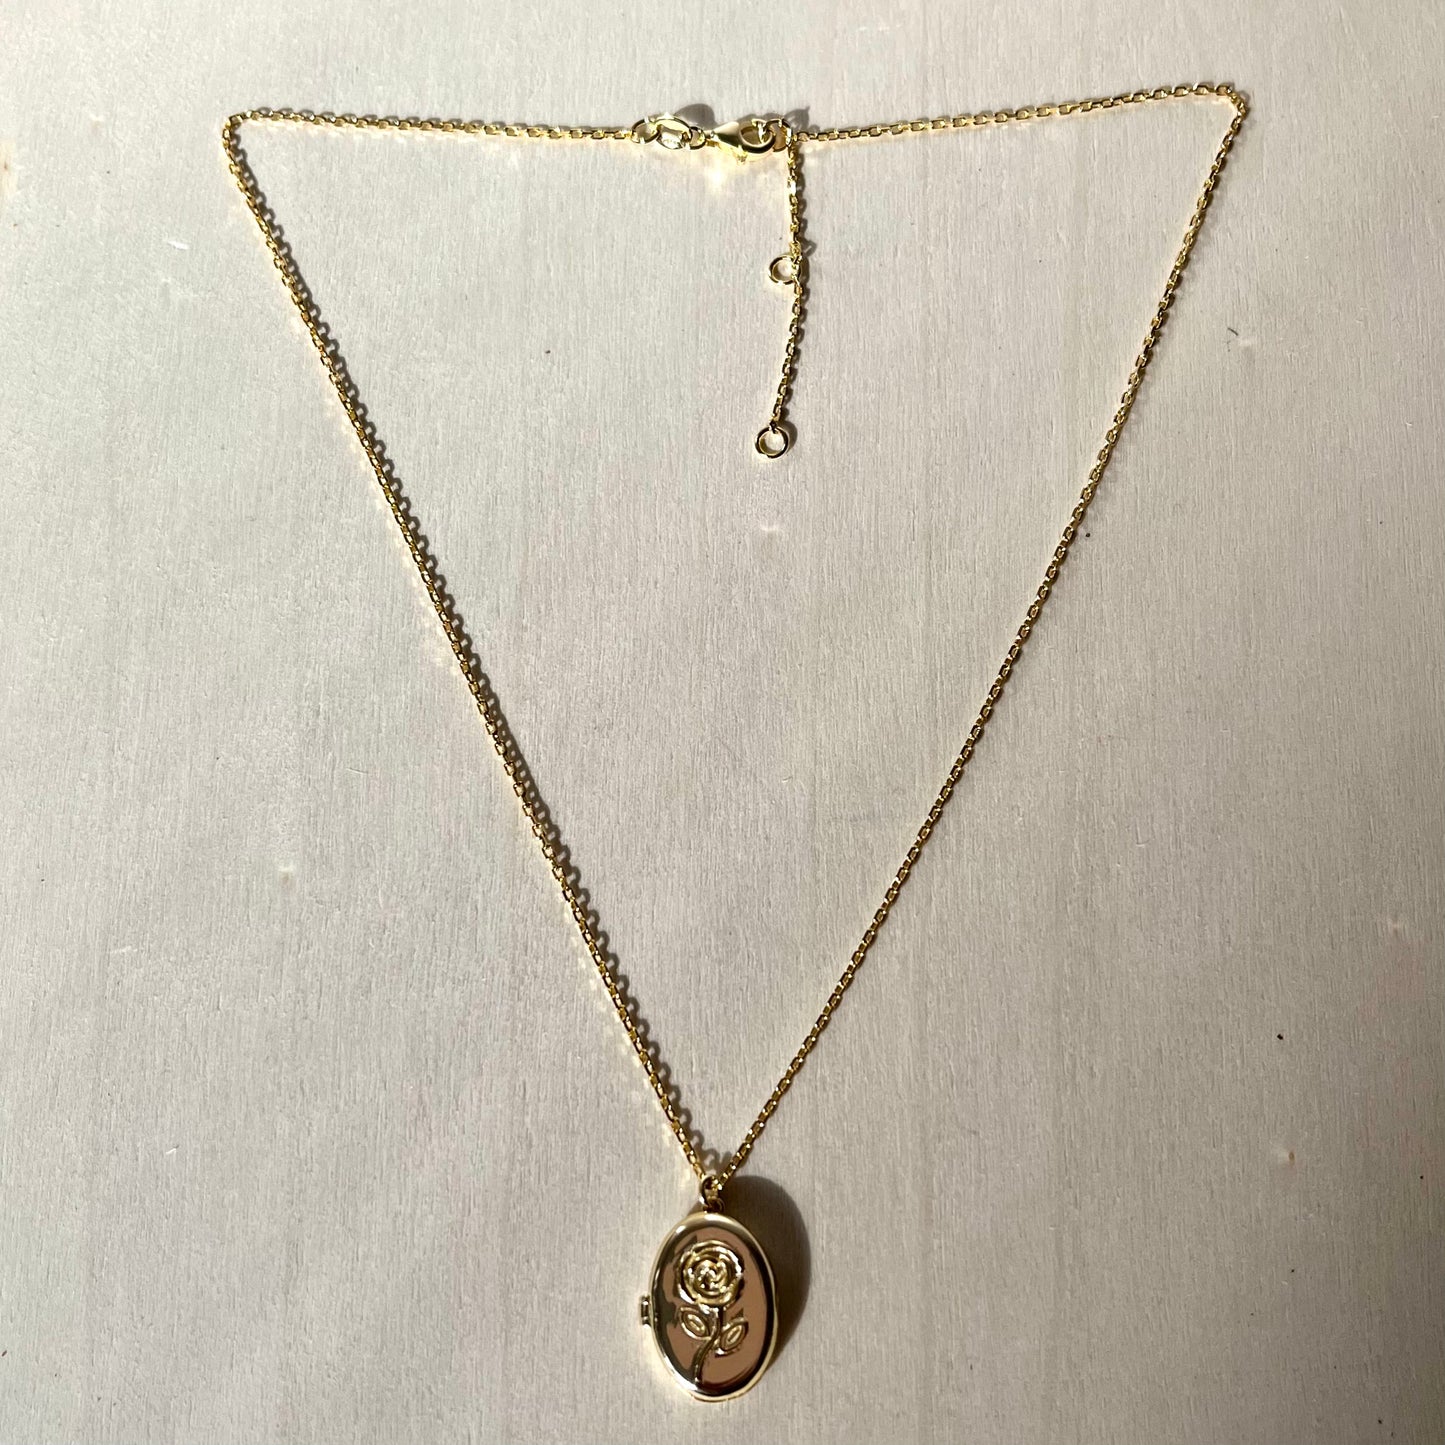 'Therese' Little Flower Locket